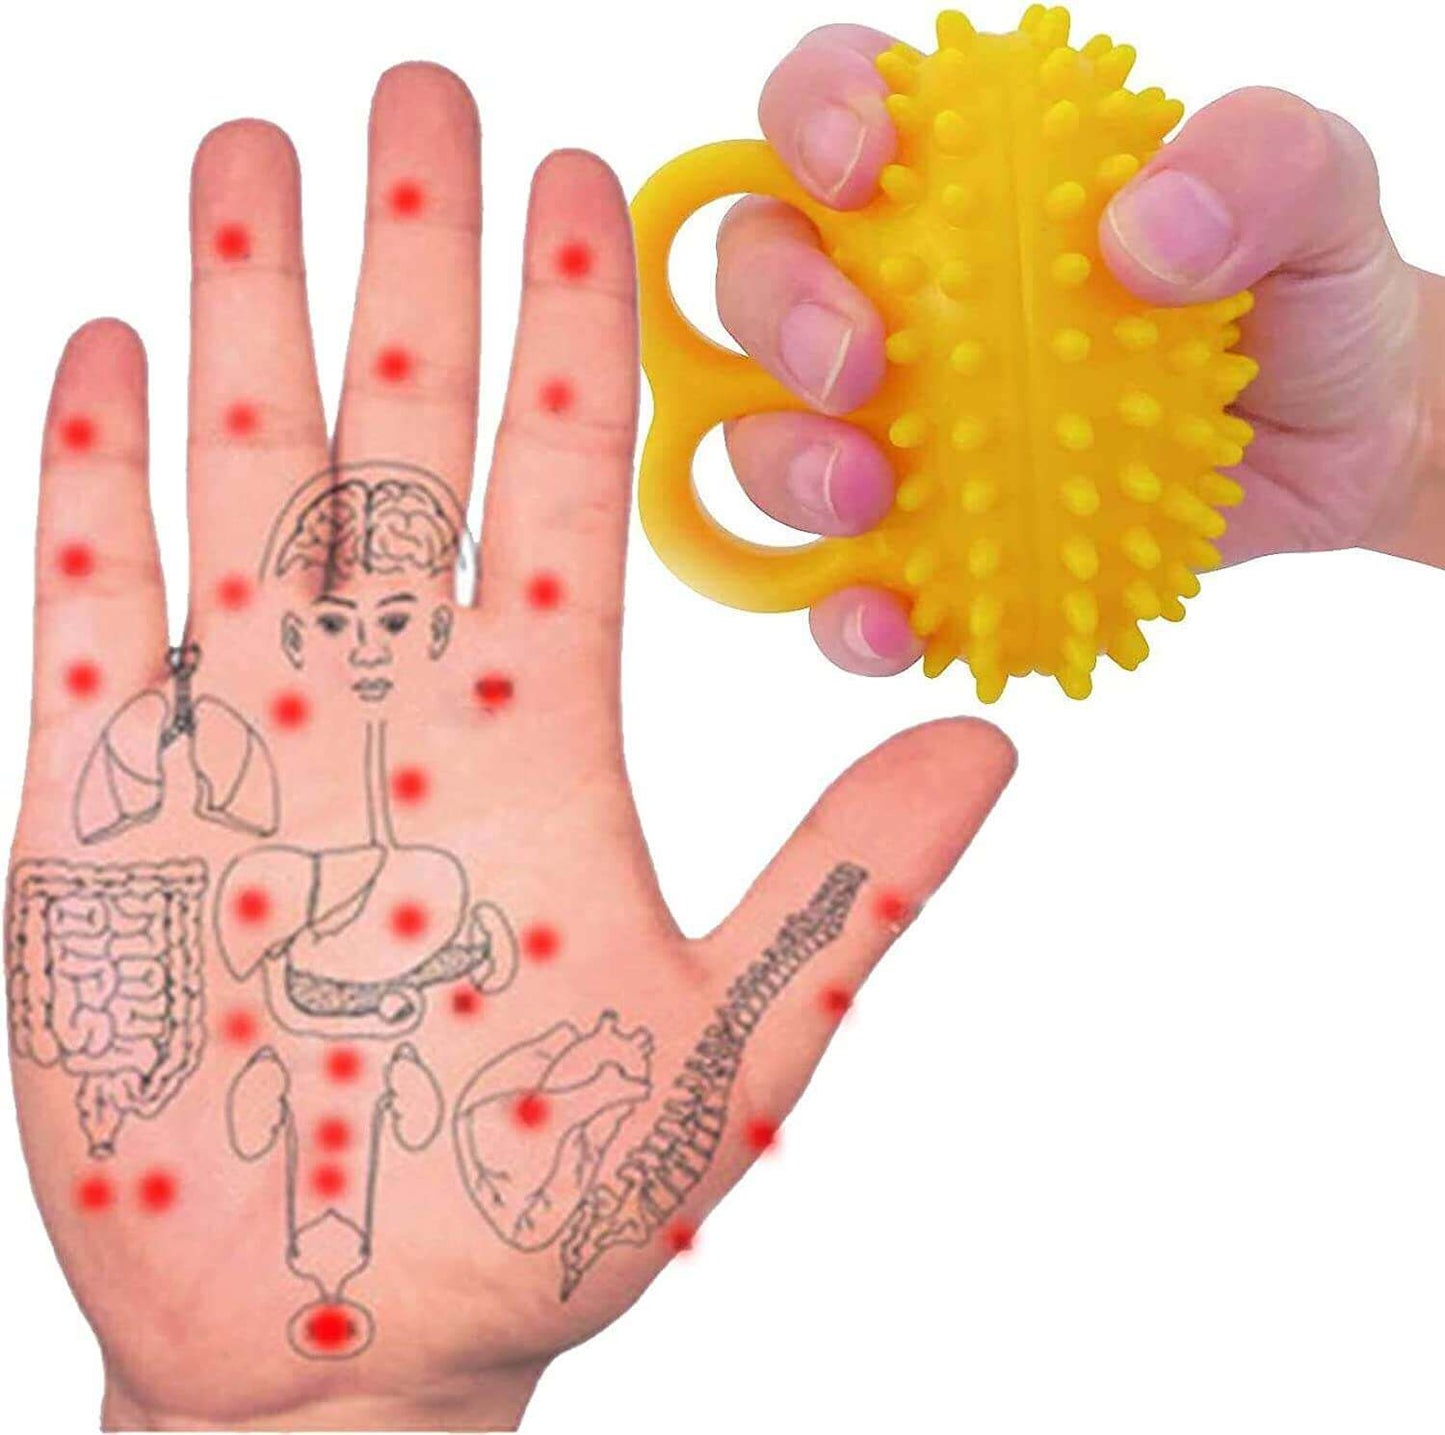 Spiky massage ball for hand and finger exercises, palm acupoints